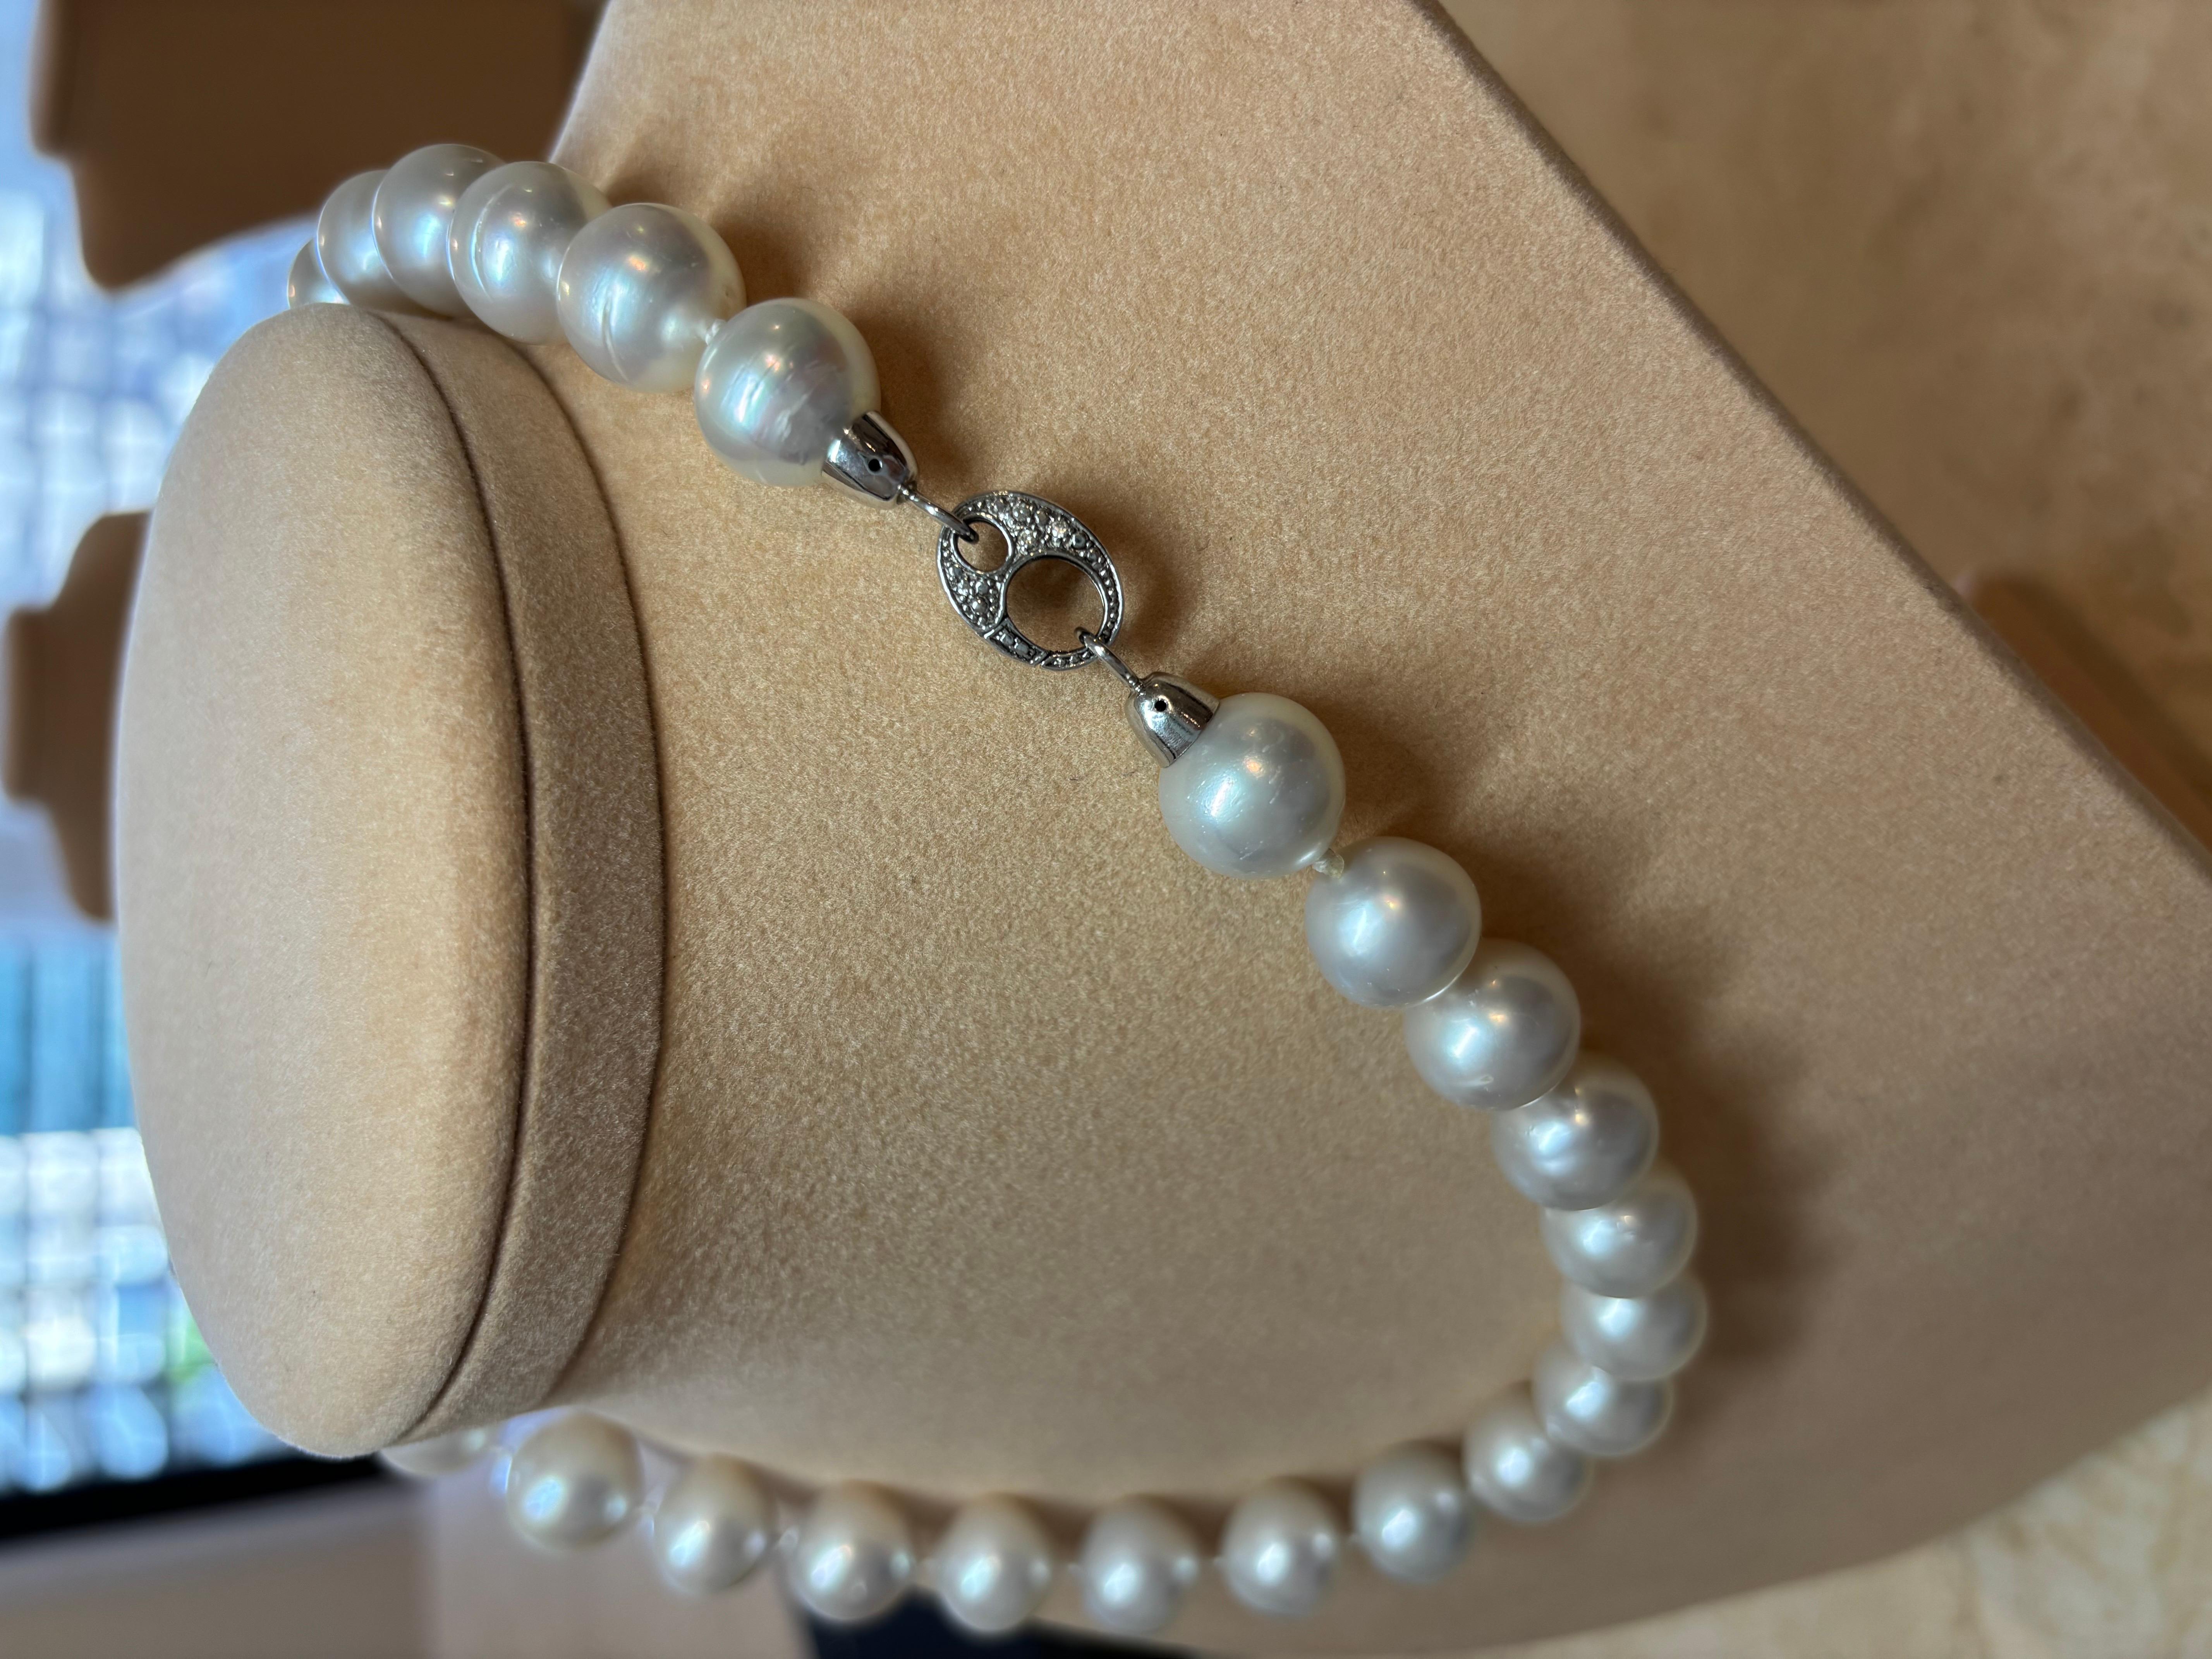 This exceptional necklace is strung with cultured White South Sea pearls, with an impressive size of 12mm - 15mm.

 It has a length of 49cm and features an 18K White Gold clasp closure set with natural diamonds.

The pearls are near round which is